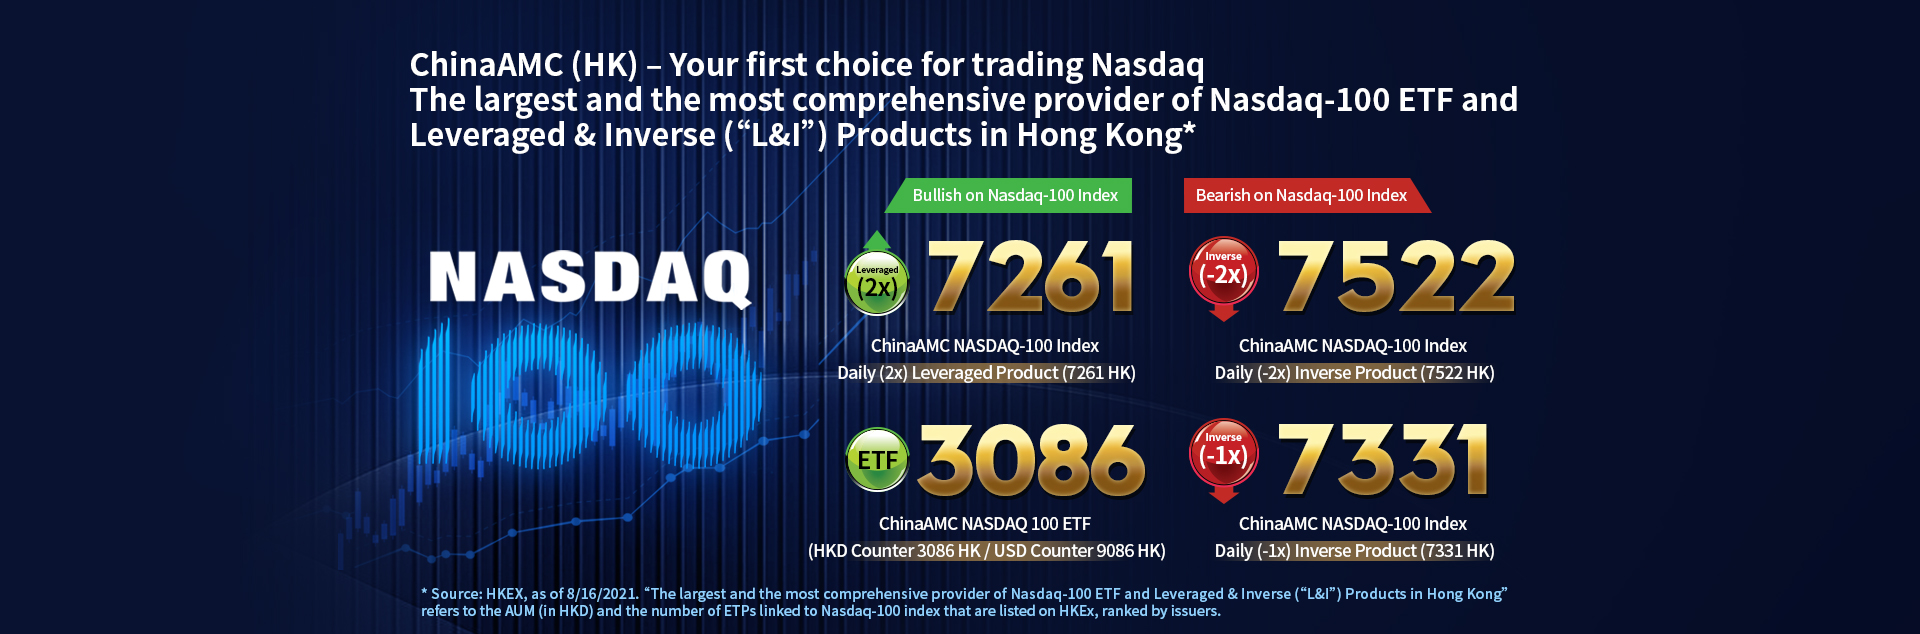 ChinaAMC (HK) - Your first choice for trading Nasdaq The largest and the most comprehensive provider of Nasdaq-100 ETFs and Leveraged & Inverse ('L&I') Products in Hong Kong